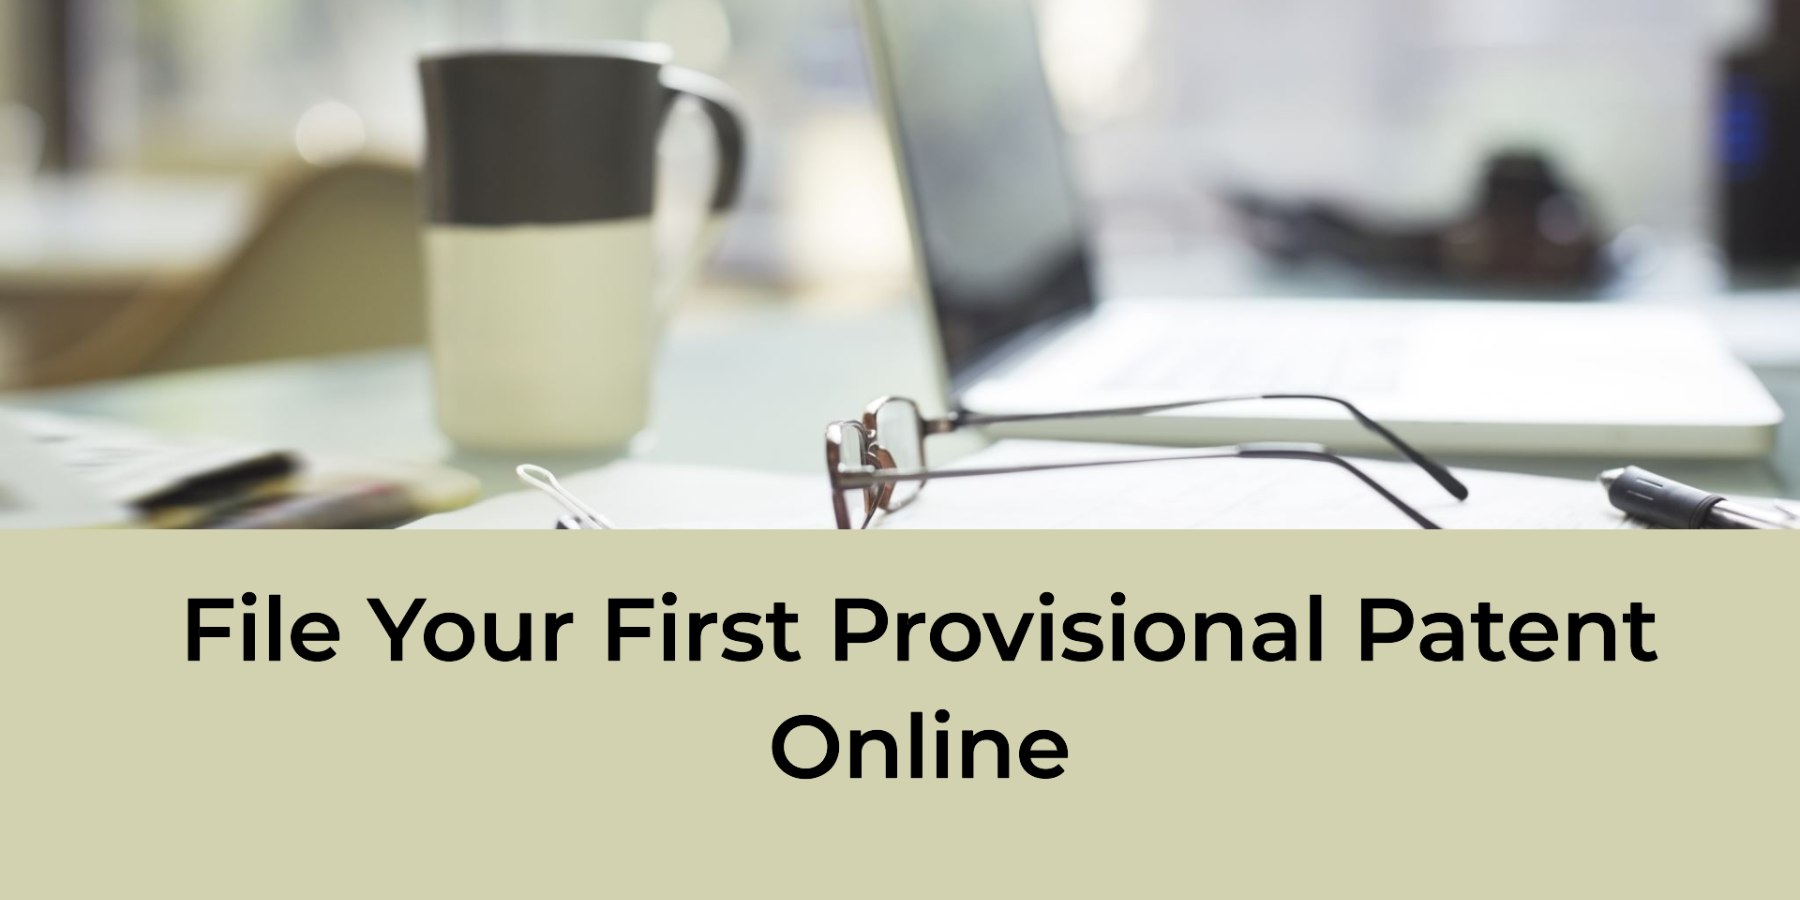 File Your First Provisional Patent